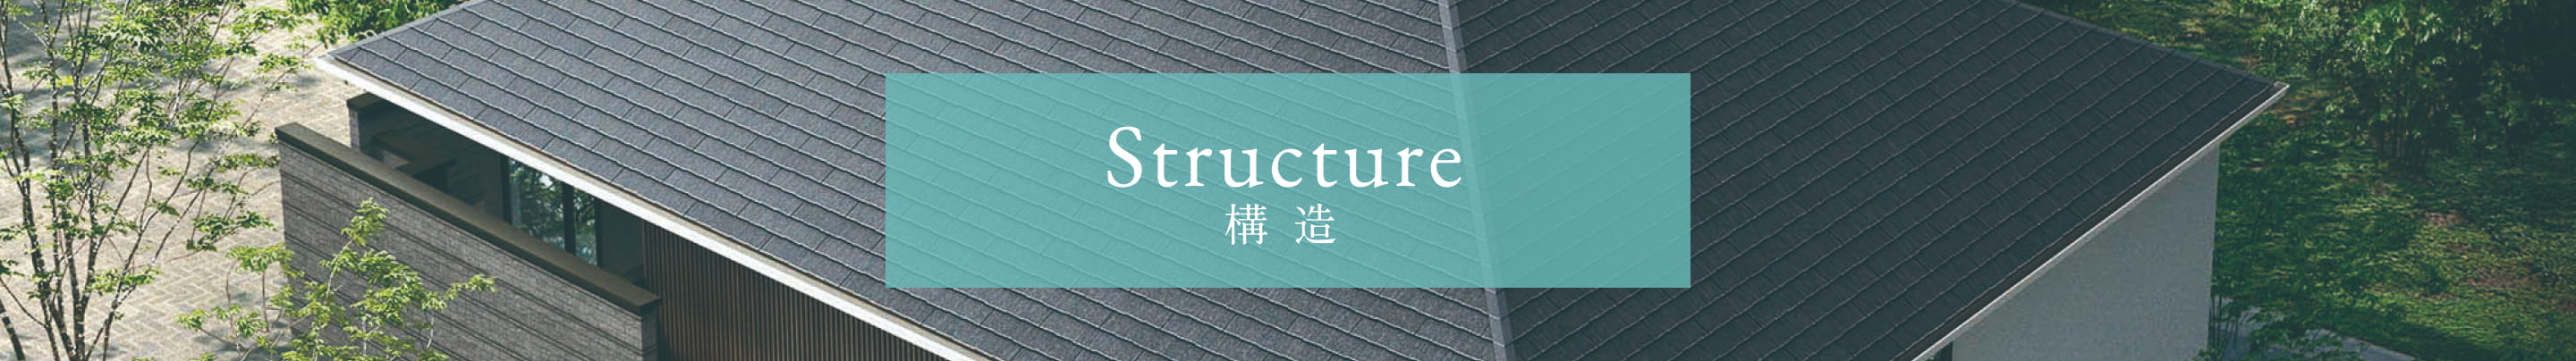 structure/構造